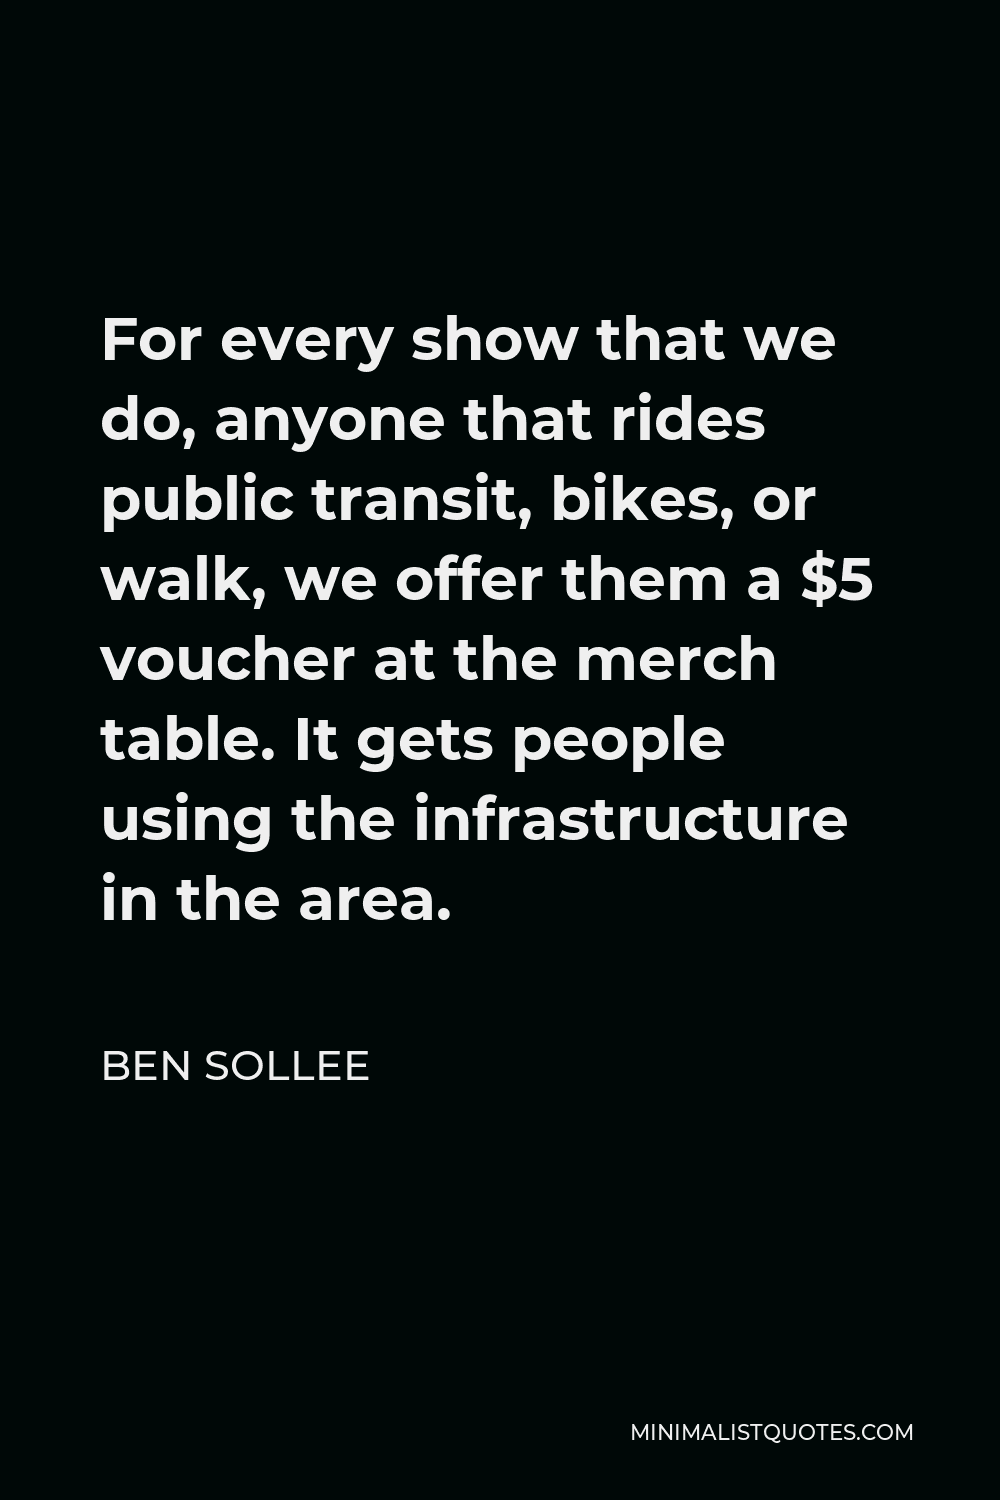 Ben Sollee Quote - For every show that we do, anyone that rides public transit, bikes, or walk, we offer them a $5 voucher at the merch table. It gets people using the infrastructure in the area.